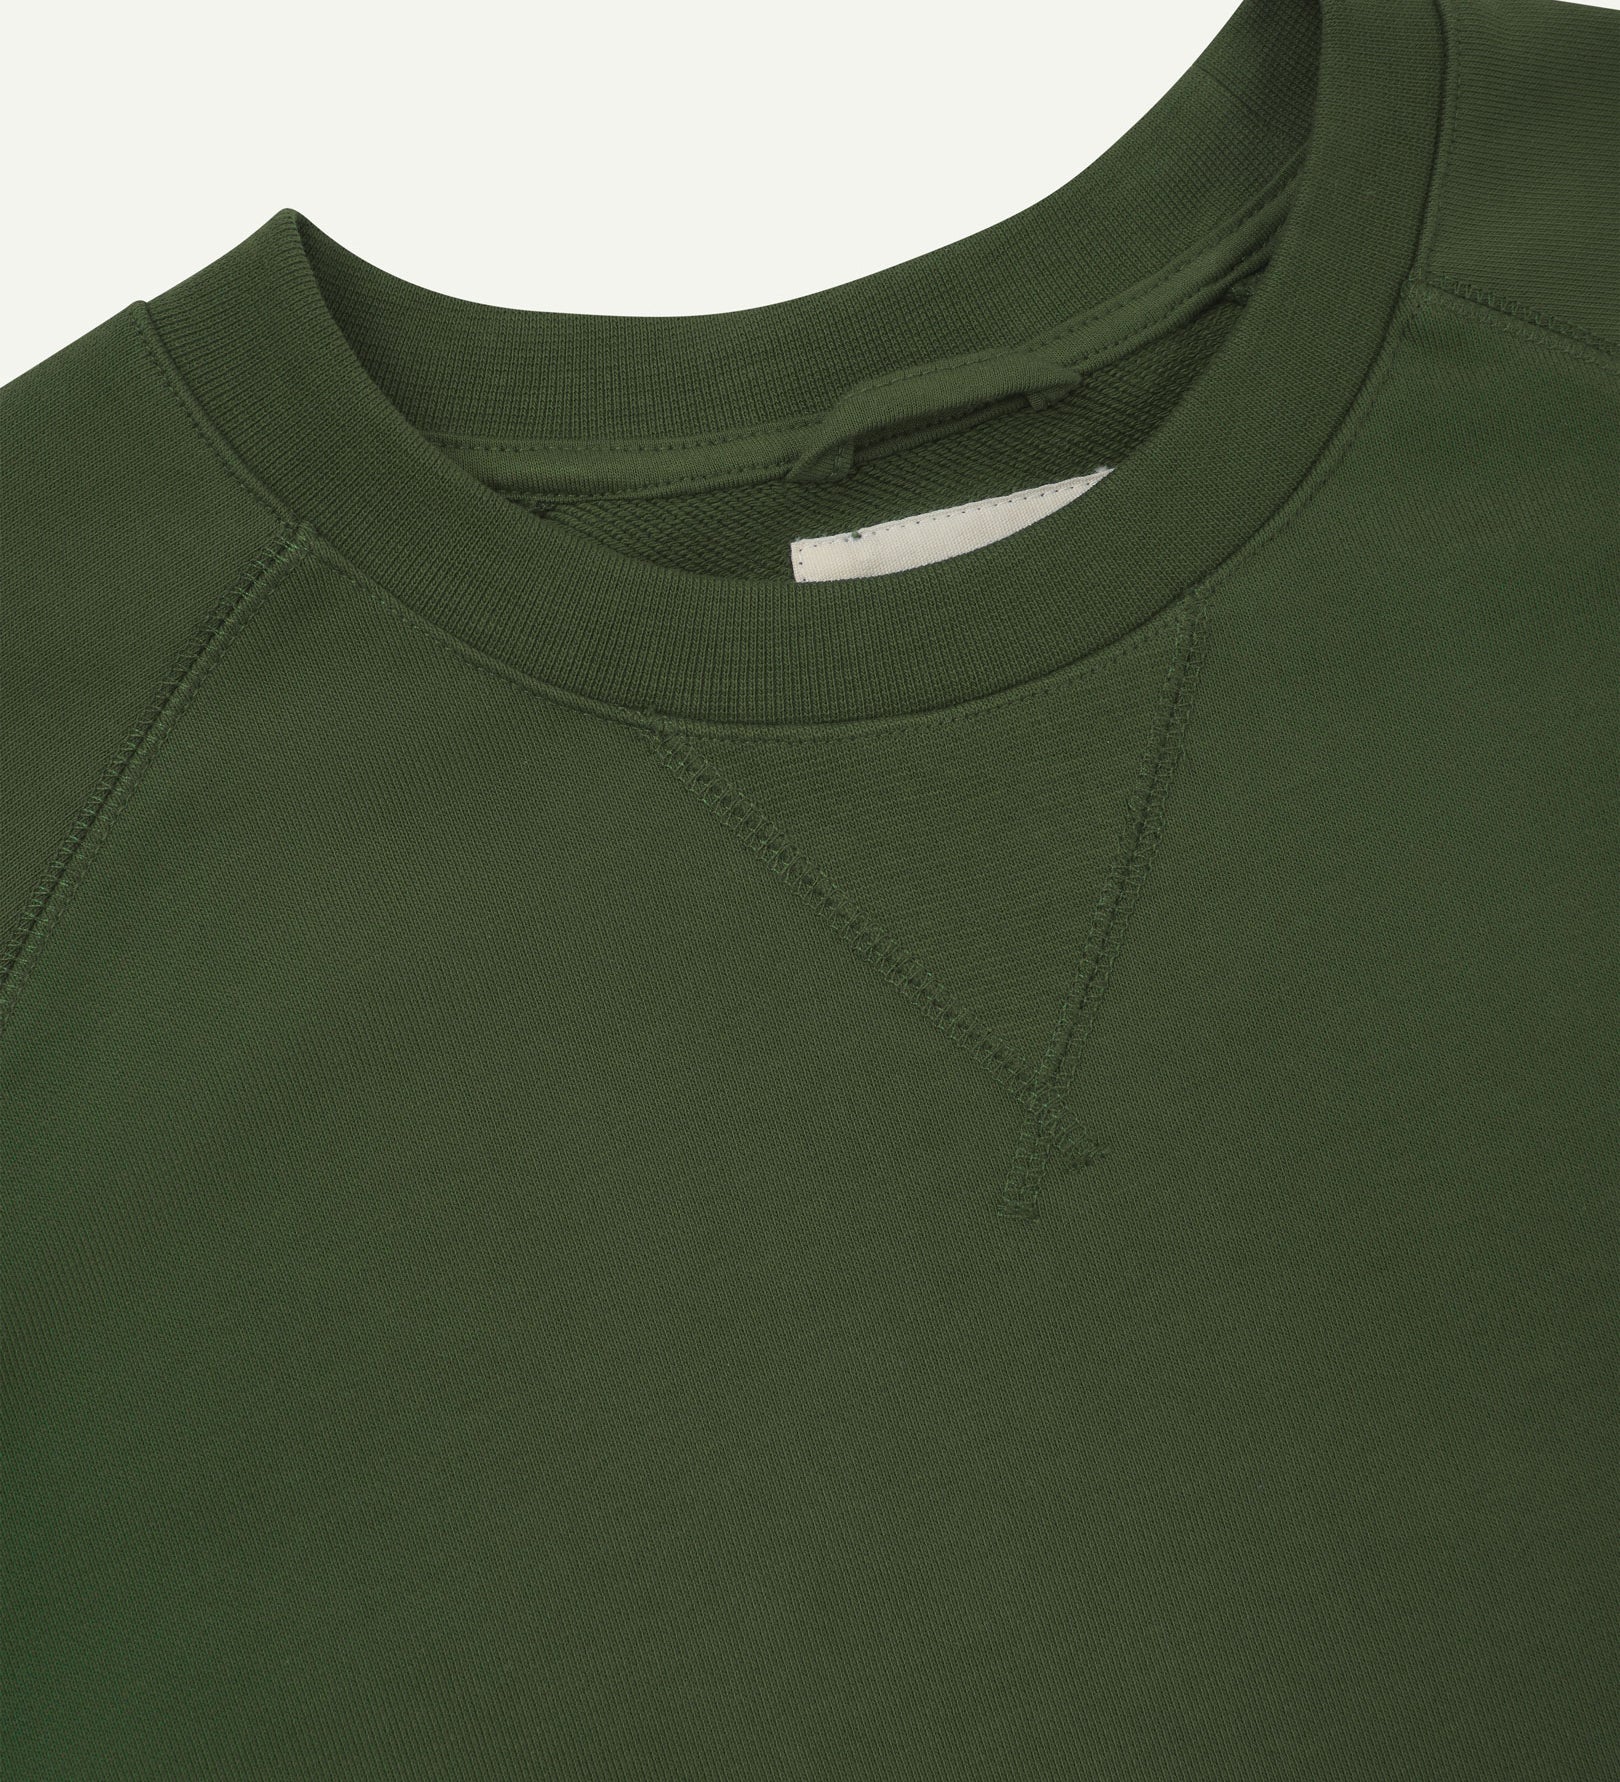 Close-up view of crew neck collar with decorative v-insert on Uskees coriander-green heavyweight cotton jersey sweatshirt.